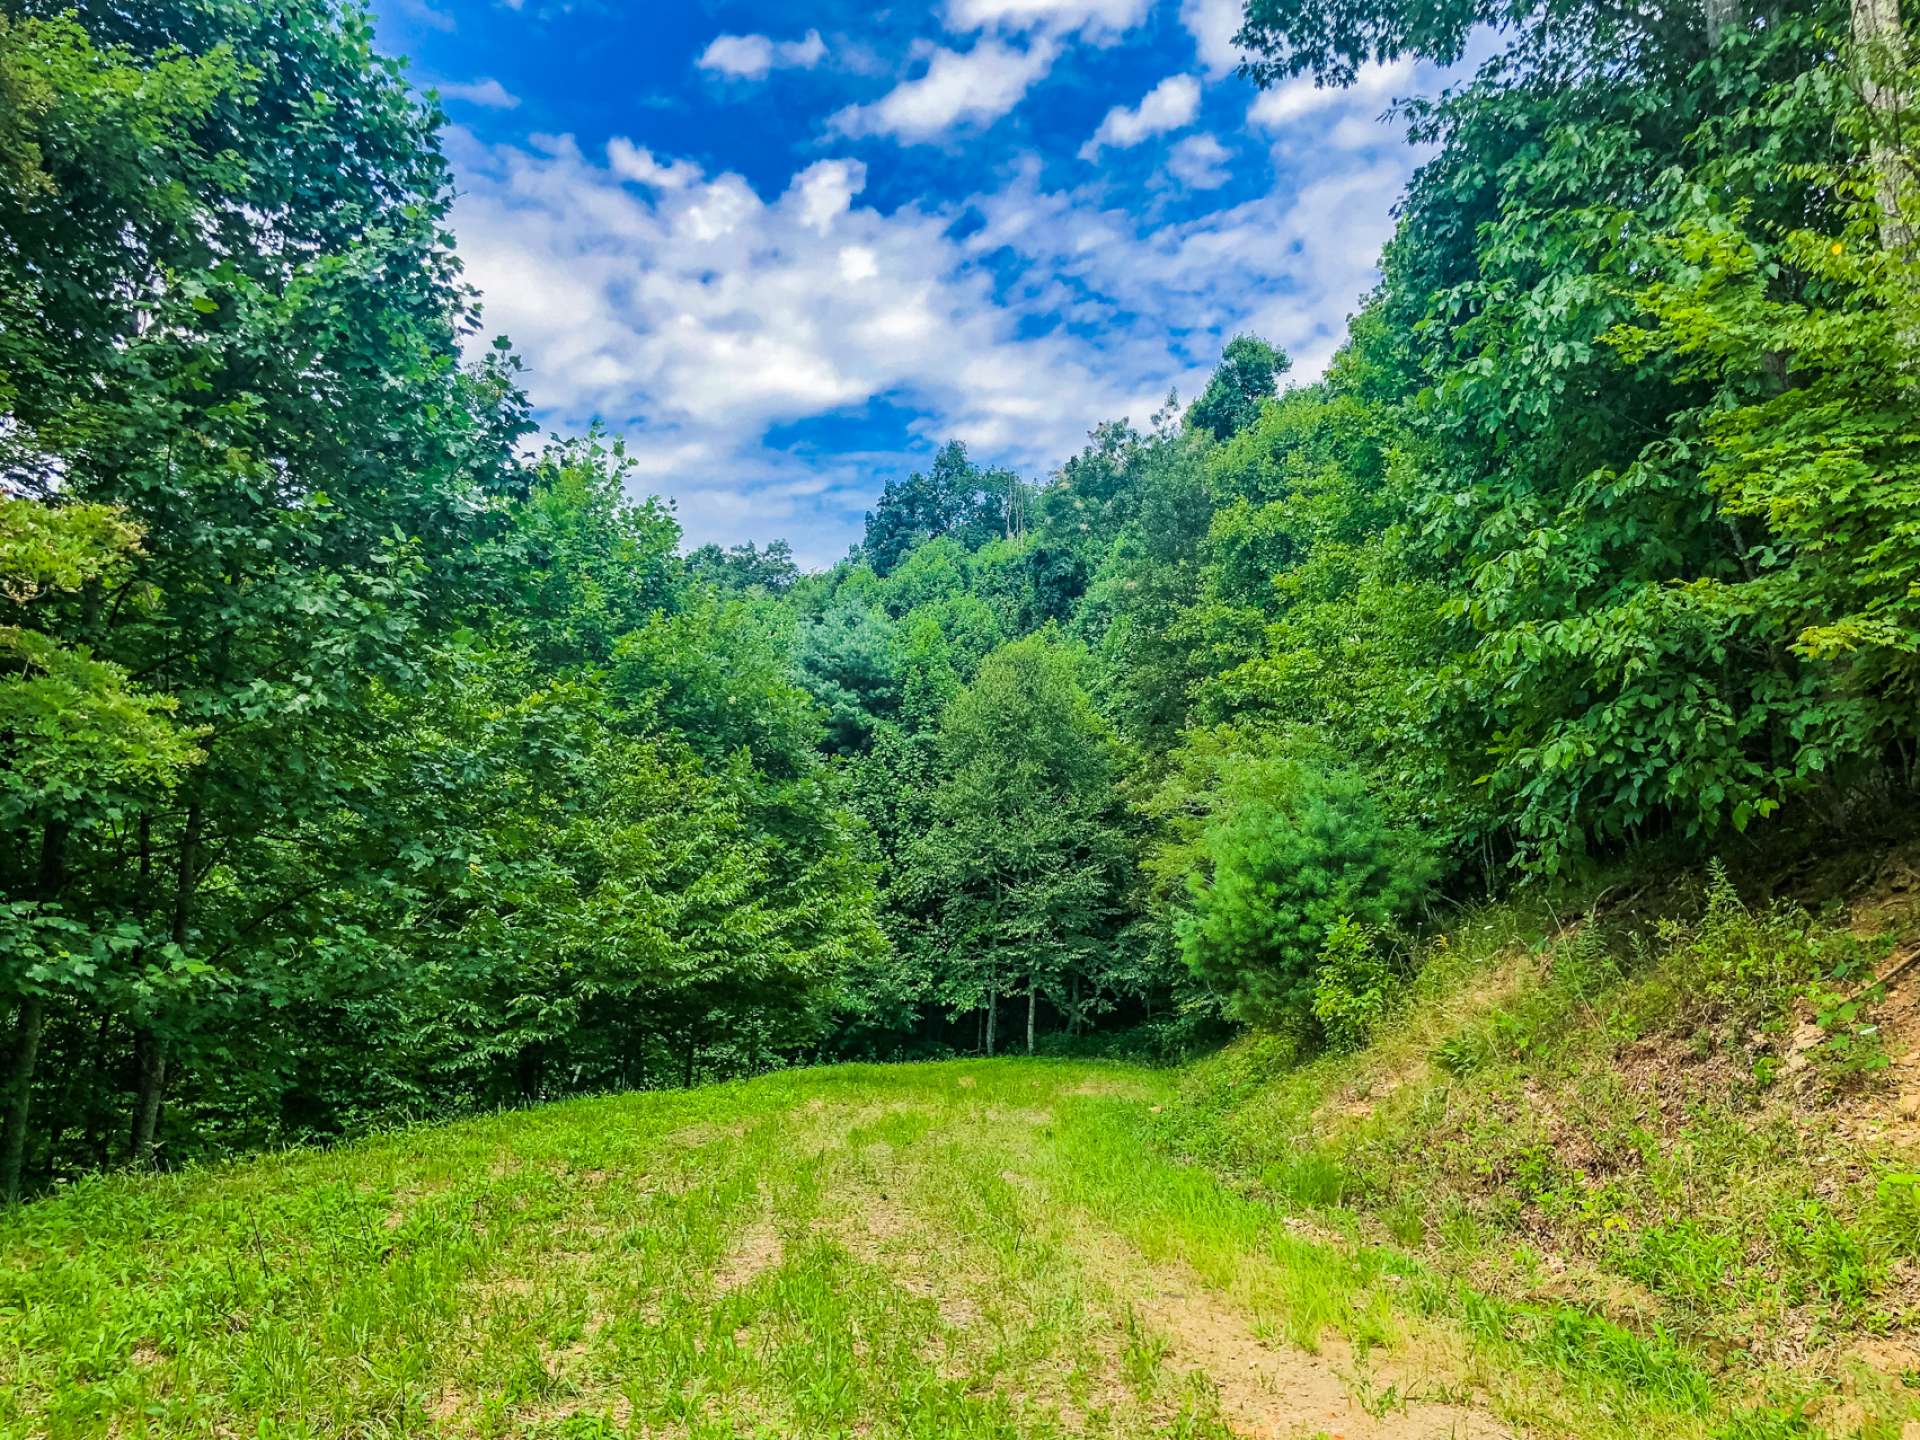 Plenty of room to roam with this 21.44 acre tract with easy access and just a short drive to West Jefferson.